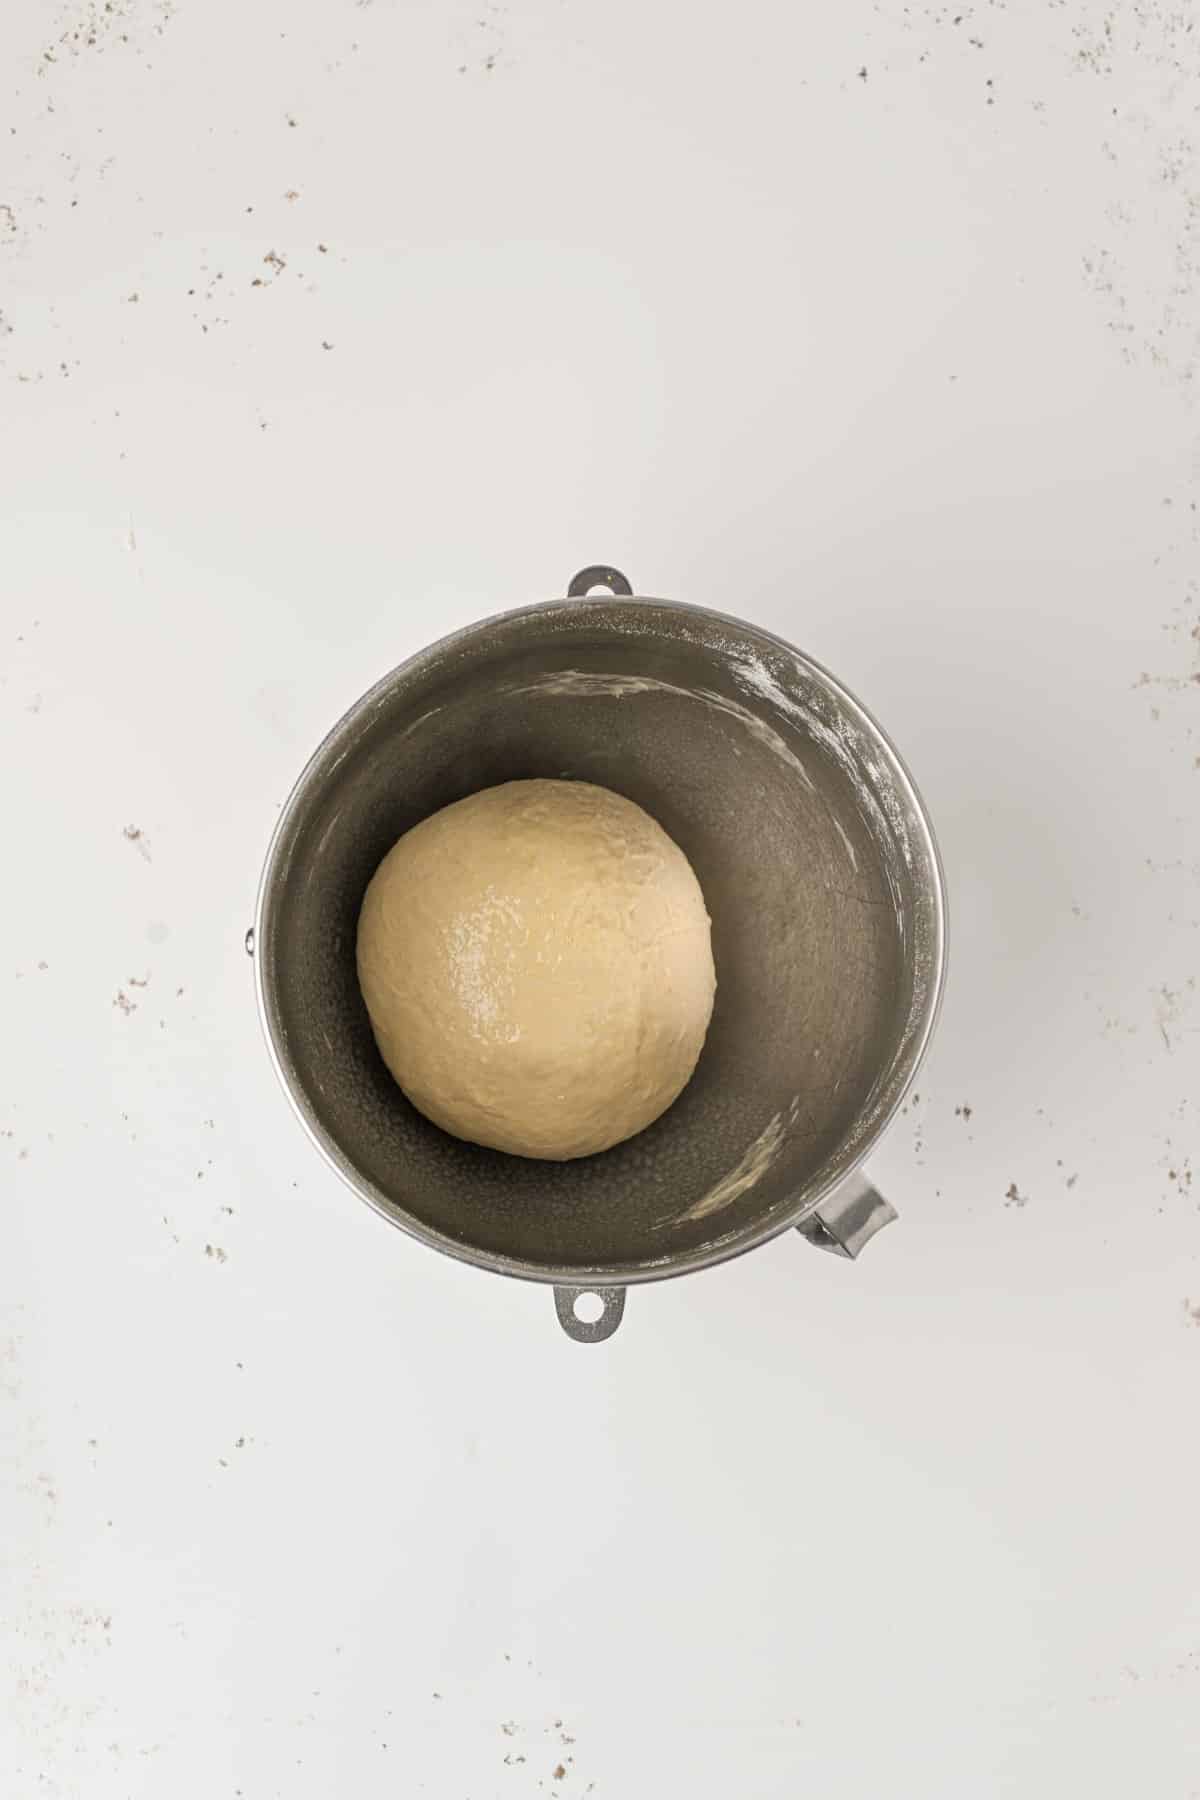 Dough in a greased bowl. 